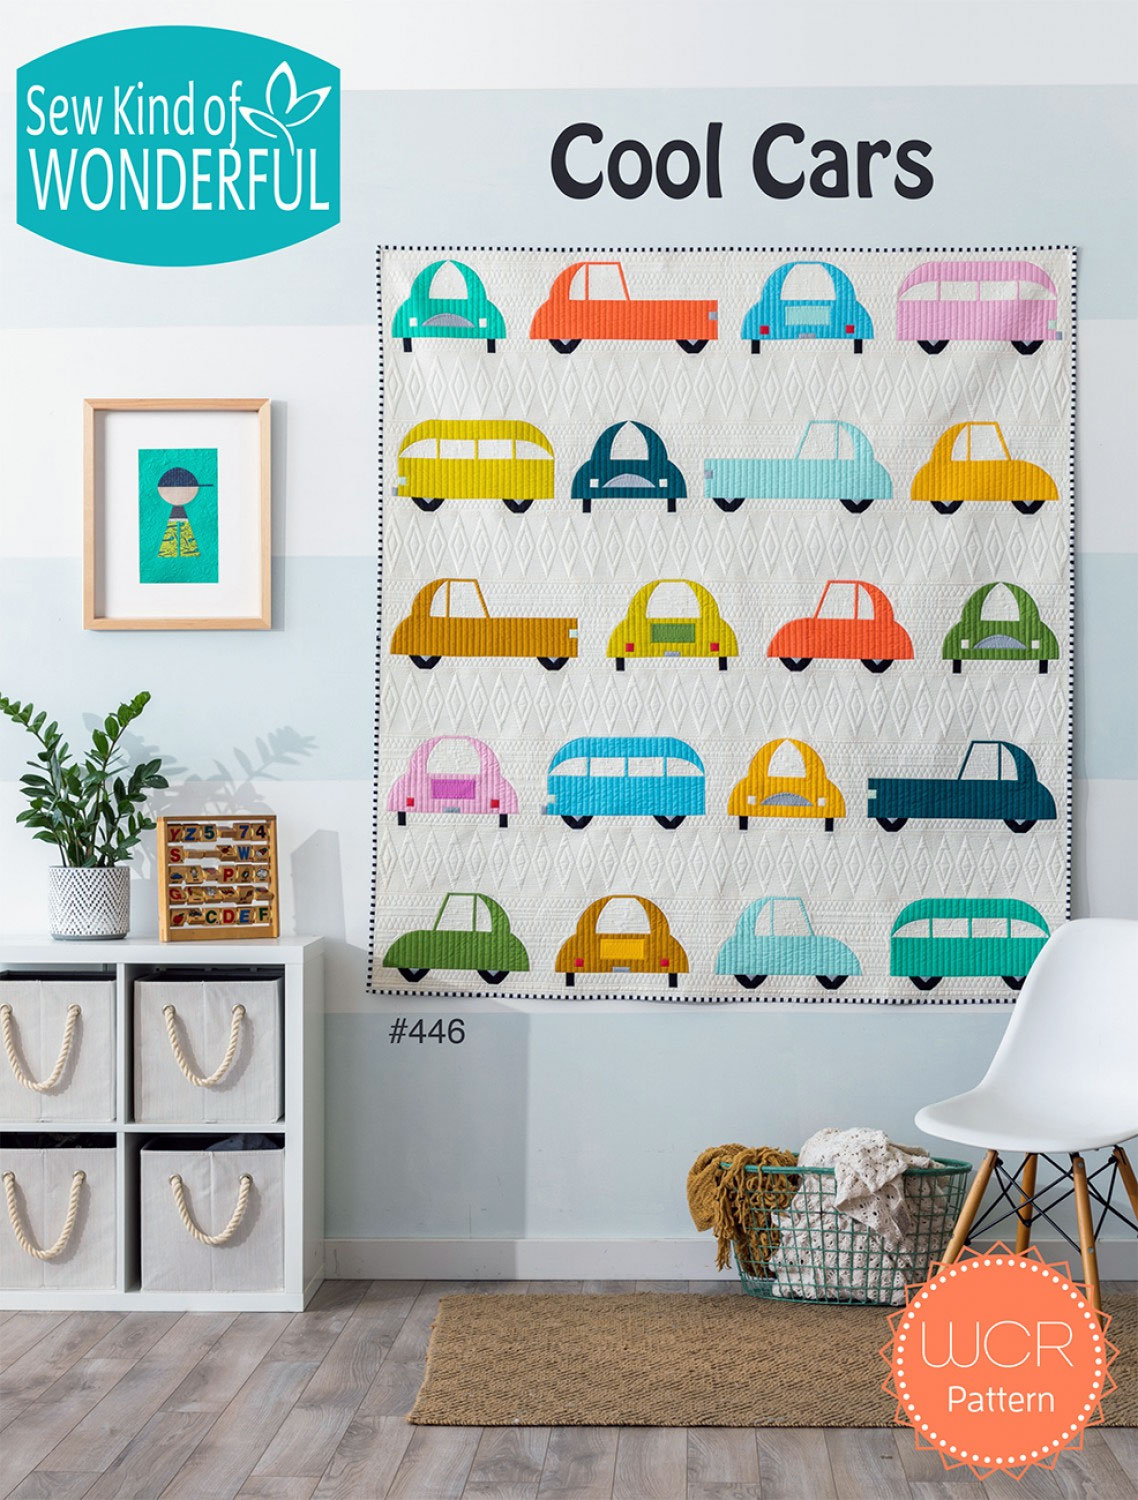 Cool-Cars-quilt-sewing-pattern-sew-kind-of-wonderful-front